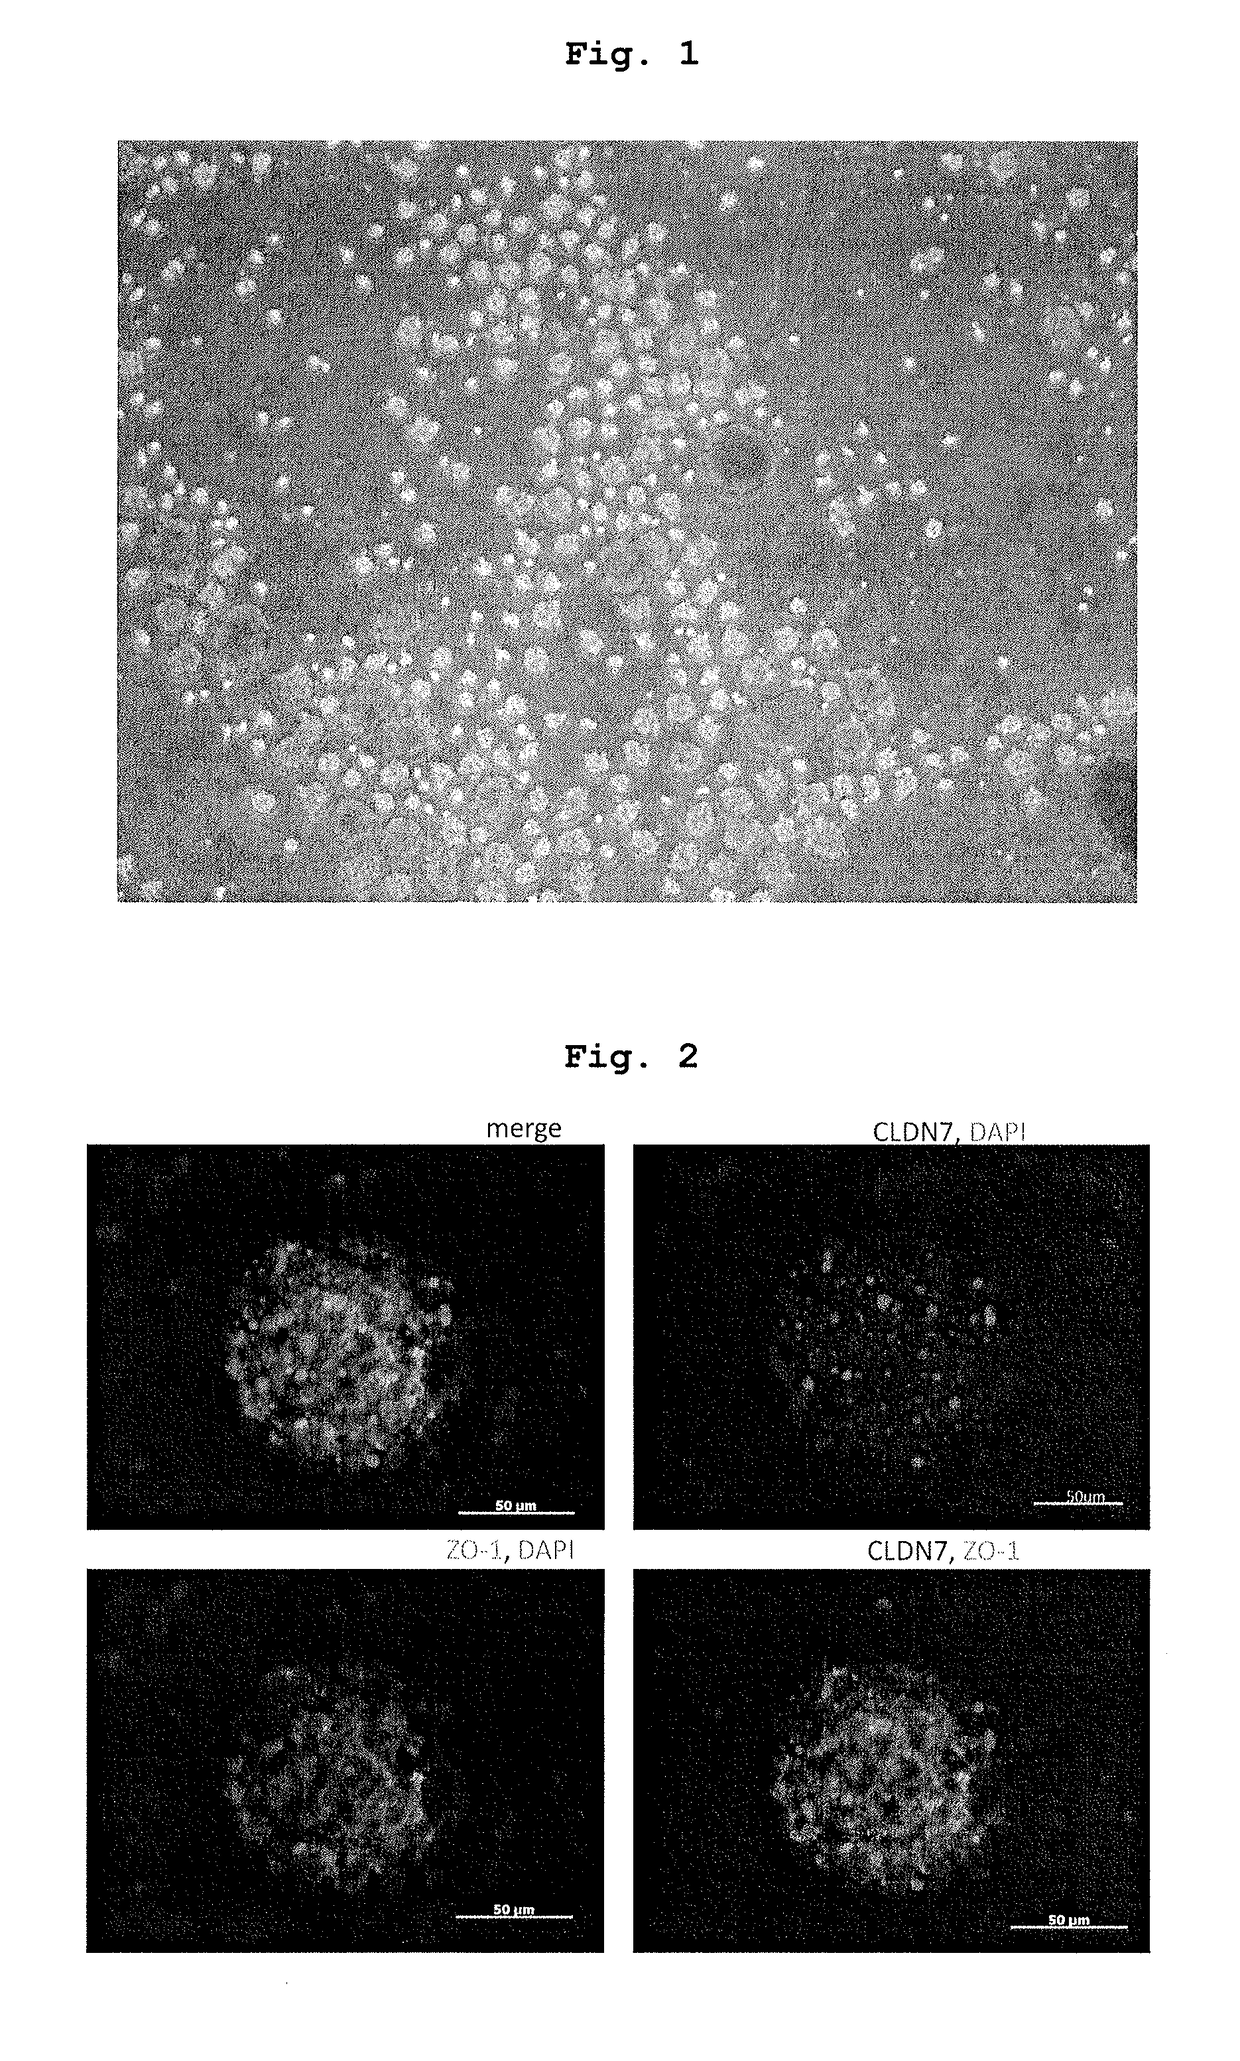 Method for producing therapeutic corneal endothelial substitute cell sphere